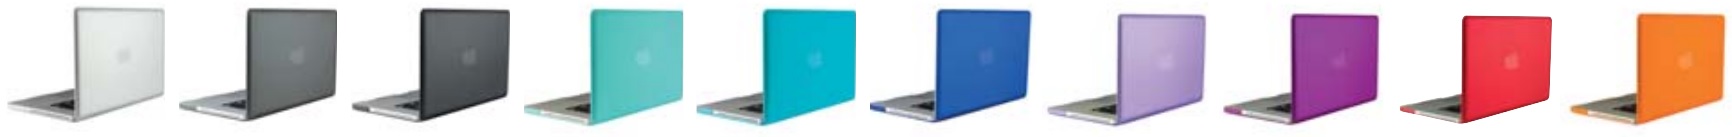 LogiLink_MacBook_Protection_Cover